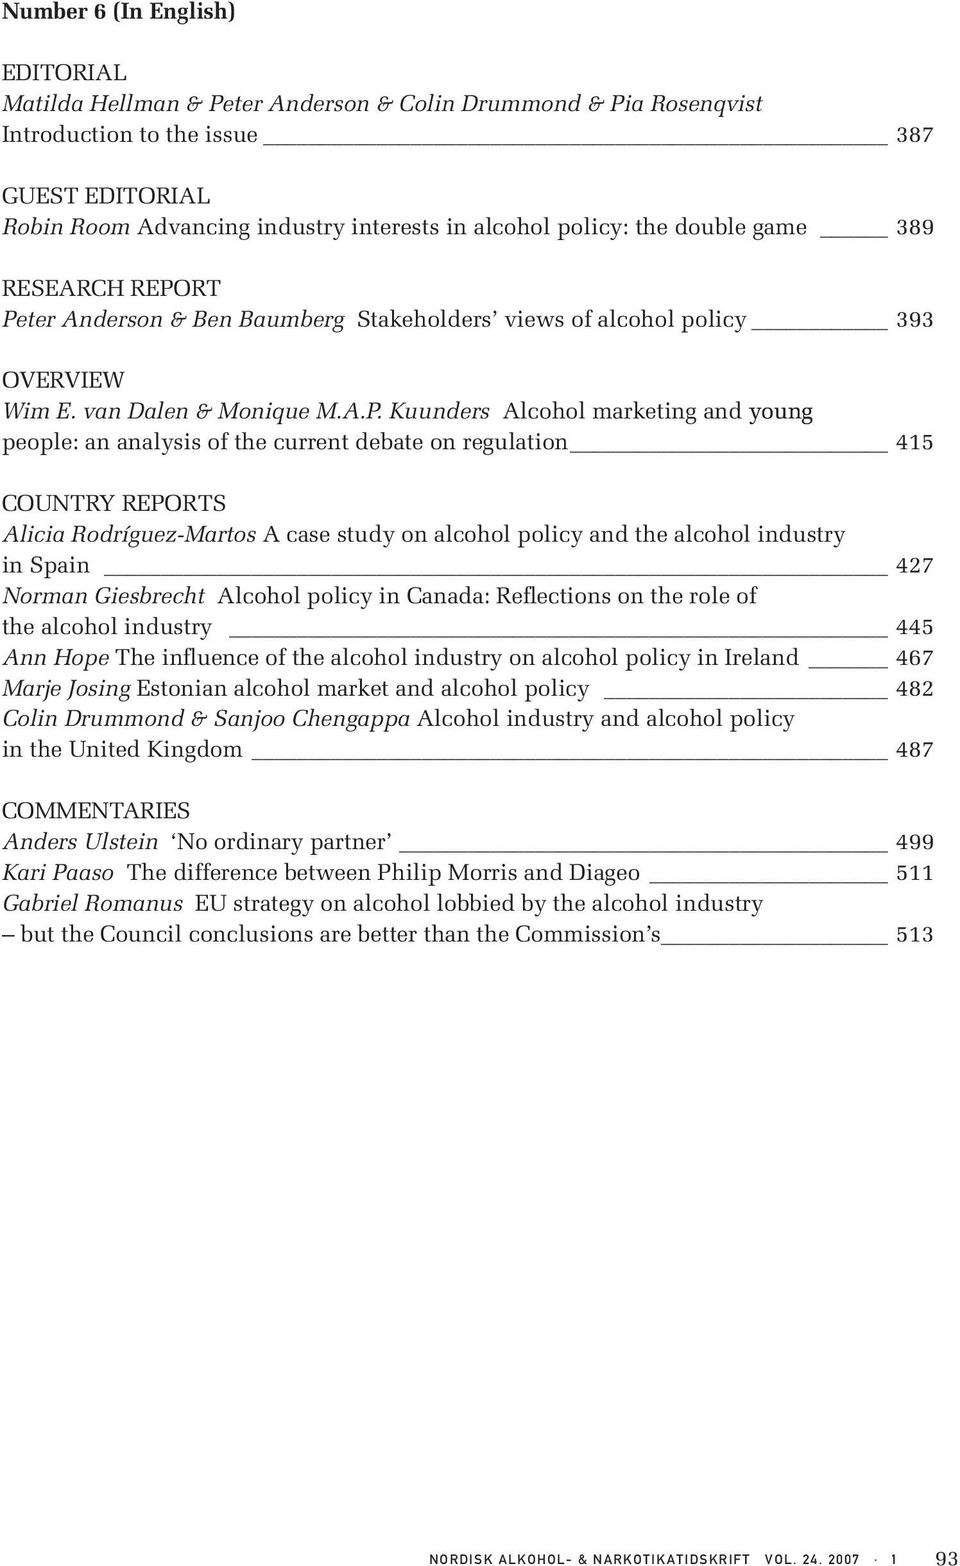 RT Peter Anderson & Ben Baumberg Stakeholders views of alcohol policy 393 OVERVIEW Wim E. van Dalen & Monique M.A.P. Kuunders Alcohol marketing and young people: an analysis of the current debate on